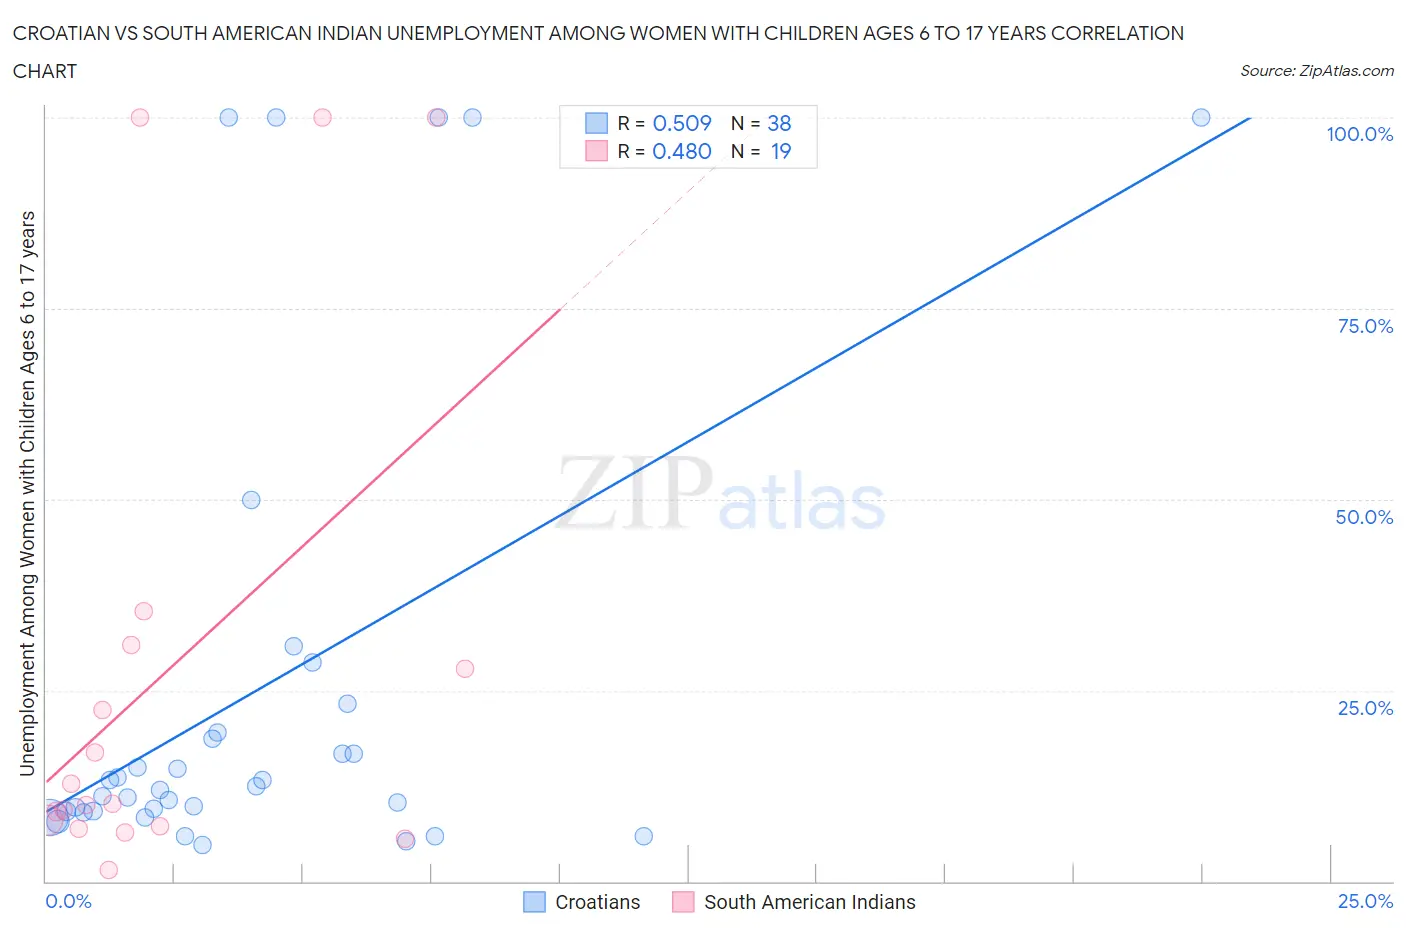 Croatian vs South American Indian Unemployment Among Women with Children Ages 6 to 17 years